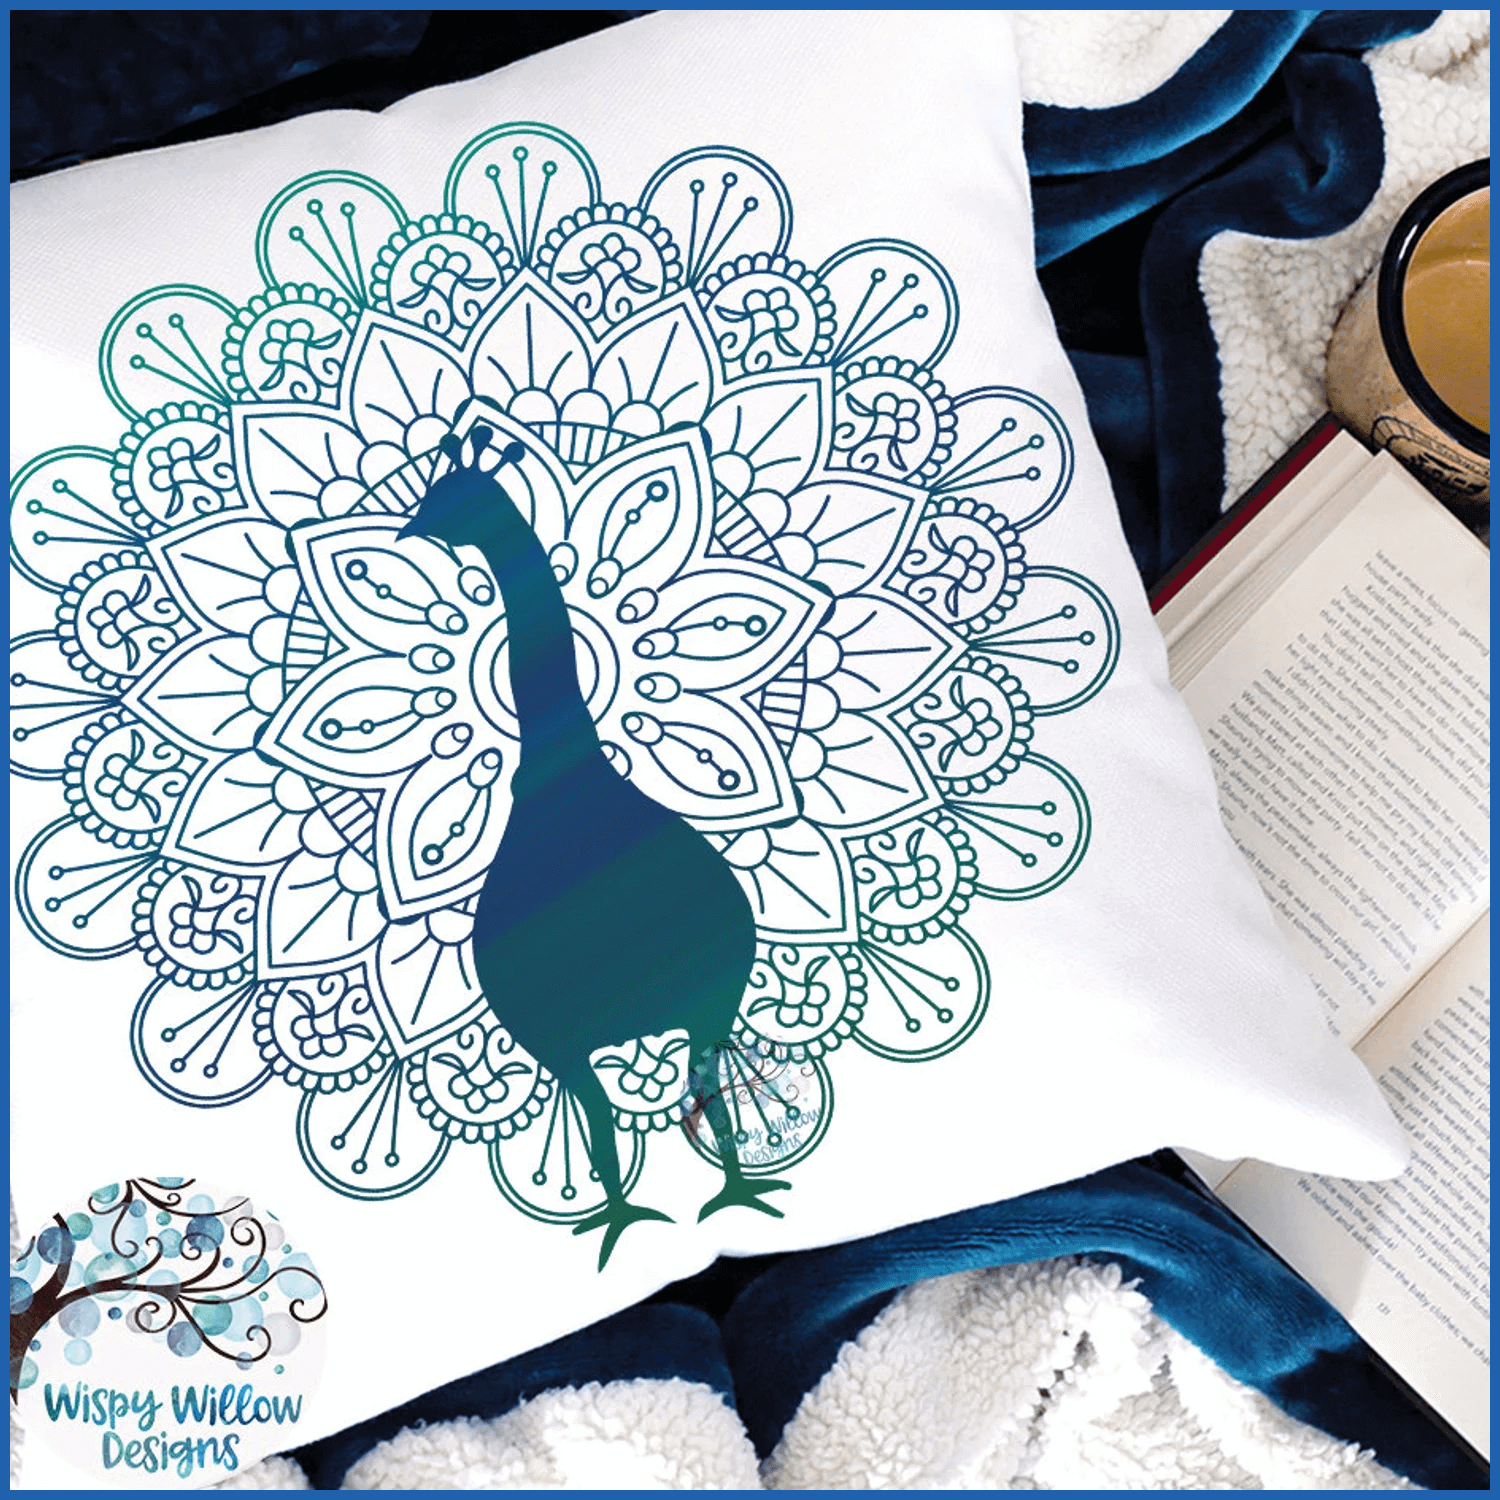 The outline of a blue peacock is drawn on a white pillow.